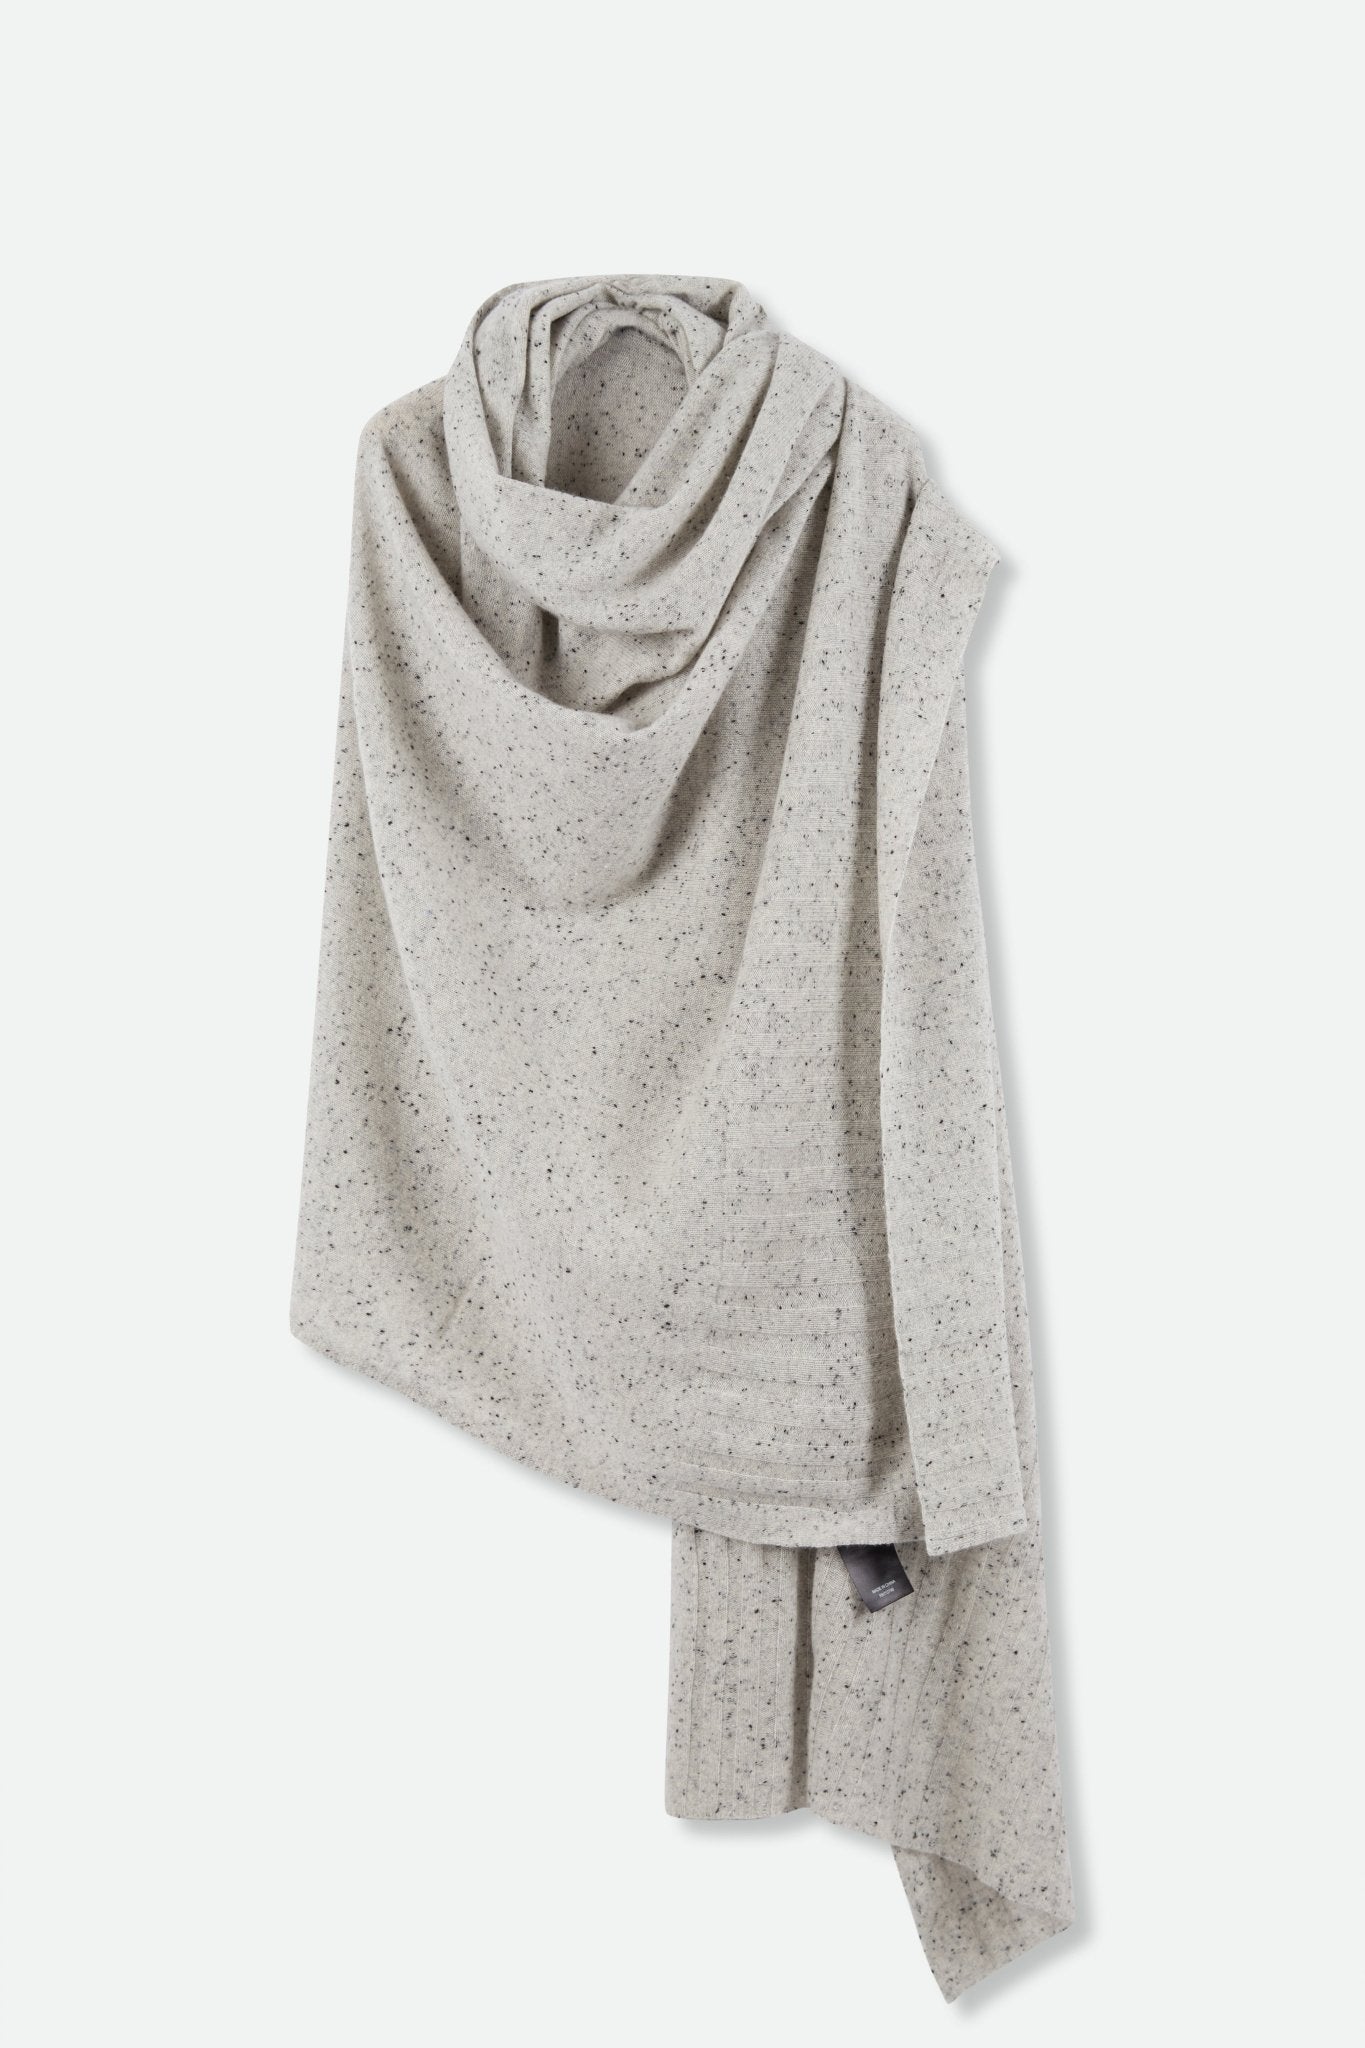 IRINA TRAVEL WRAP IN PURE NEPALESE CASHMERE - Jarbo